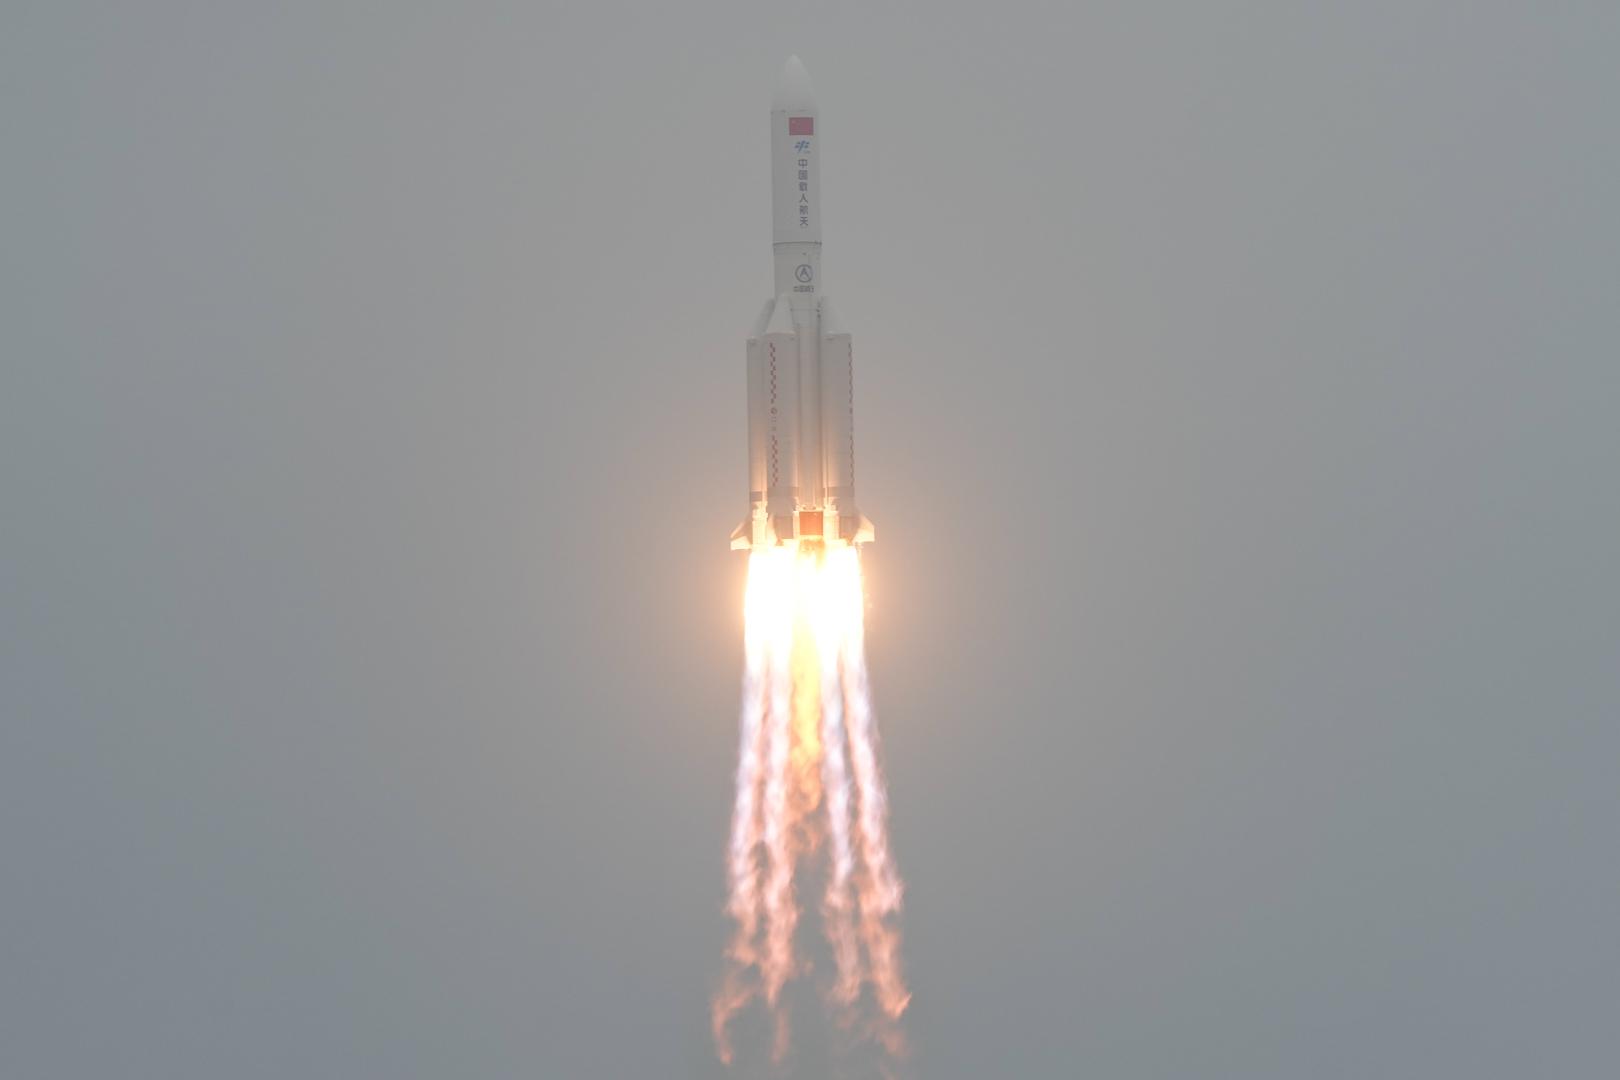 (EyesonSci)CHINA-HAINAN-WENCHANG-SPACE STATION-CORE MODULE-LAUNCH (CN) (210429) -- WENCHANG, April 29, 2021 (Xinhua) -- The Long March-5B Y2 rocket, carrying the Tianhe module, blasts off from the Wenchang Spacecraft Launch Site in south China's Hainan Province, April 29, 2021. China on Thursday sent into space the core module of its space station, kicking off a series of key launch missions that aim to complete the construction of the station by the end of next year. (Xinhua/Zhang Liyun) Zhang Liyun  Photo: XINHUA/PIXSELL